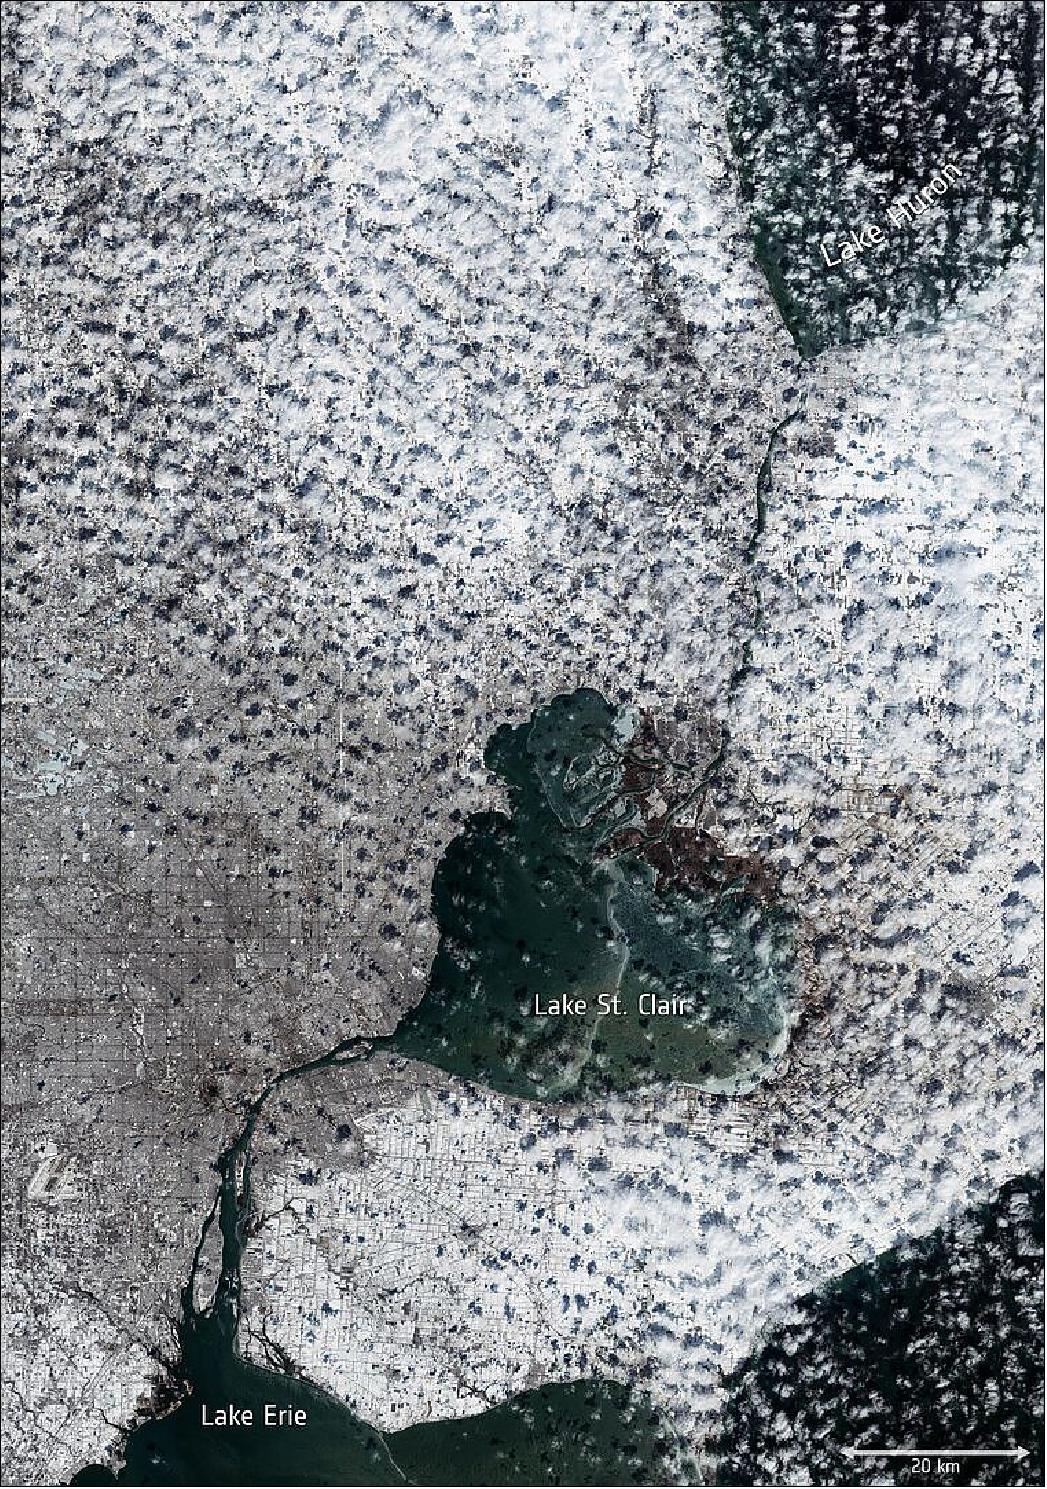 Figure 59: This image, captured by the Copernicus Sentinel-2 mission on 29 February, shows the extent of the snow in the area surrounding Lake St. Clair, Lake Erie and Lake Huron. A layer of ice can be seen over both Lake St. Clair and Lake Erie (image credit: ESA, the image contains modified Copernicus Sentinel data (2020), processed by ESA, CC BY-SA 3.0 IGO)